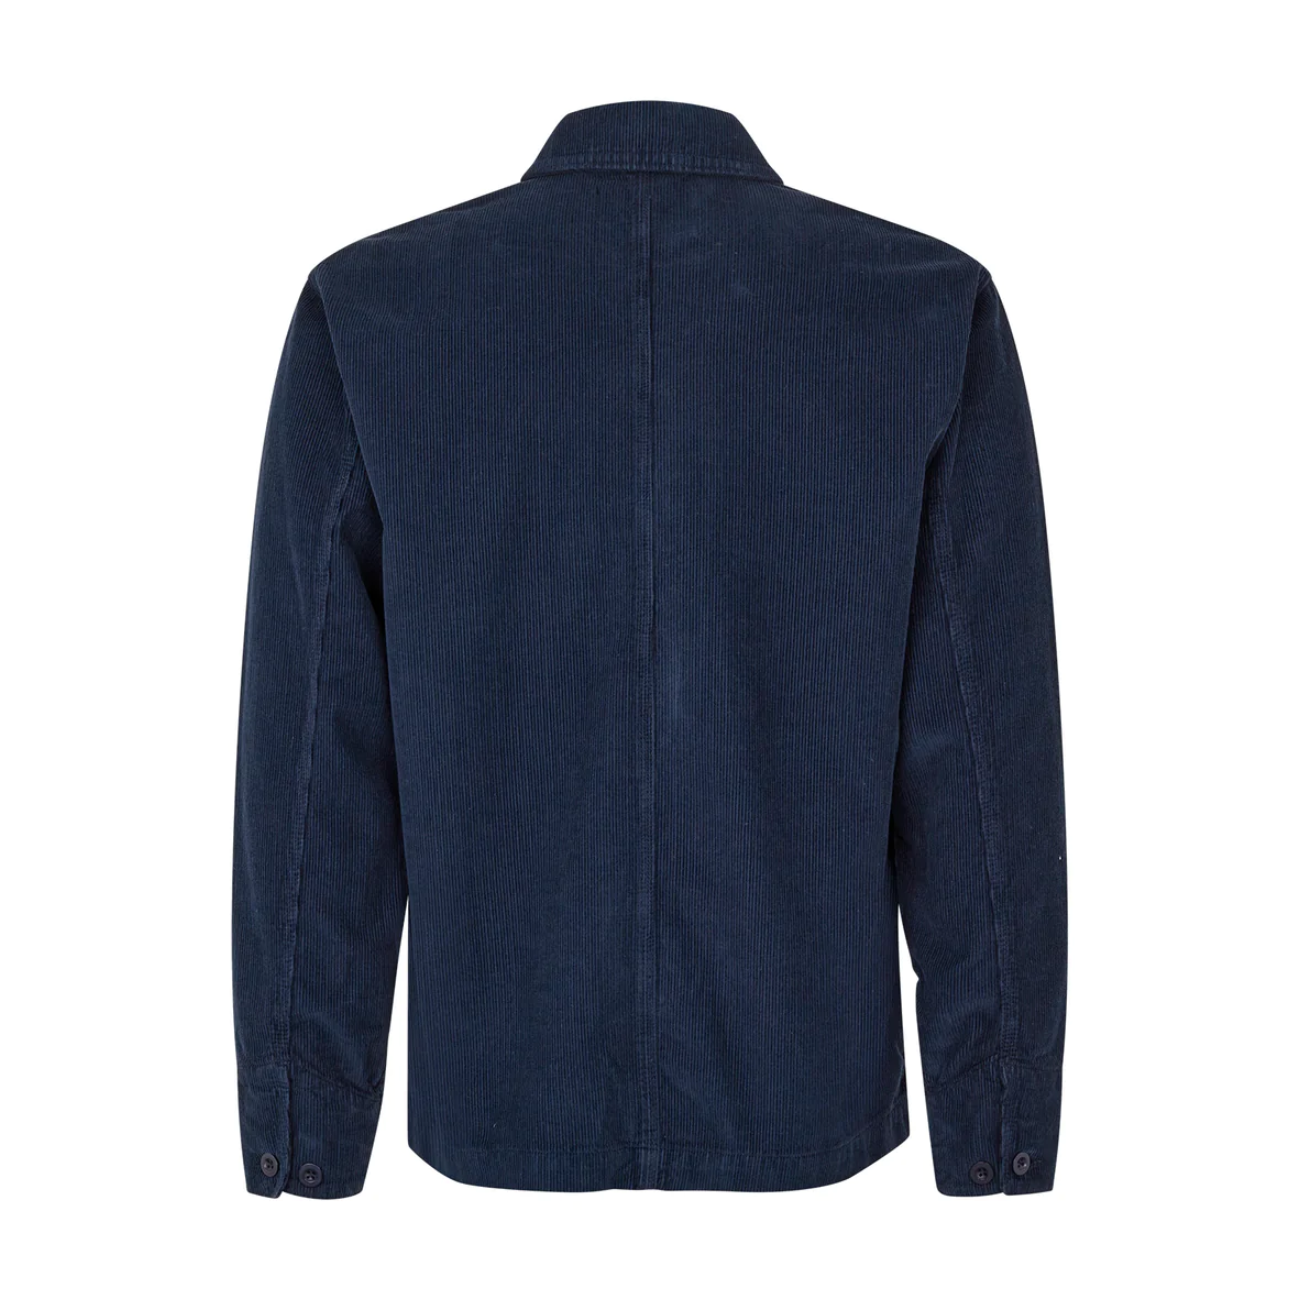 Cotton Cord Chore Jacket / Deep Well (Navy Blue) - NYHEDER!